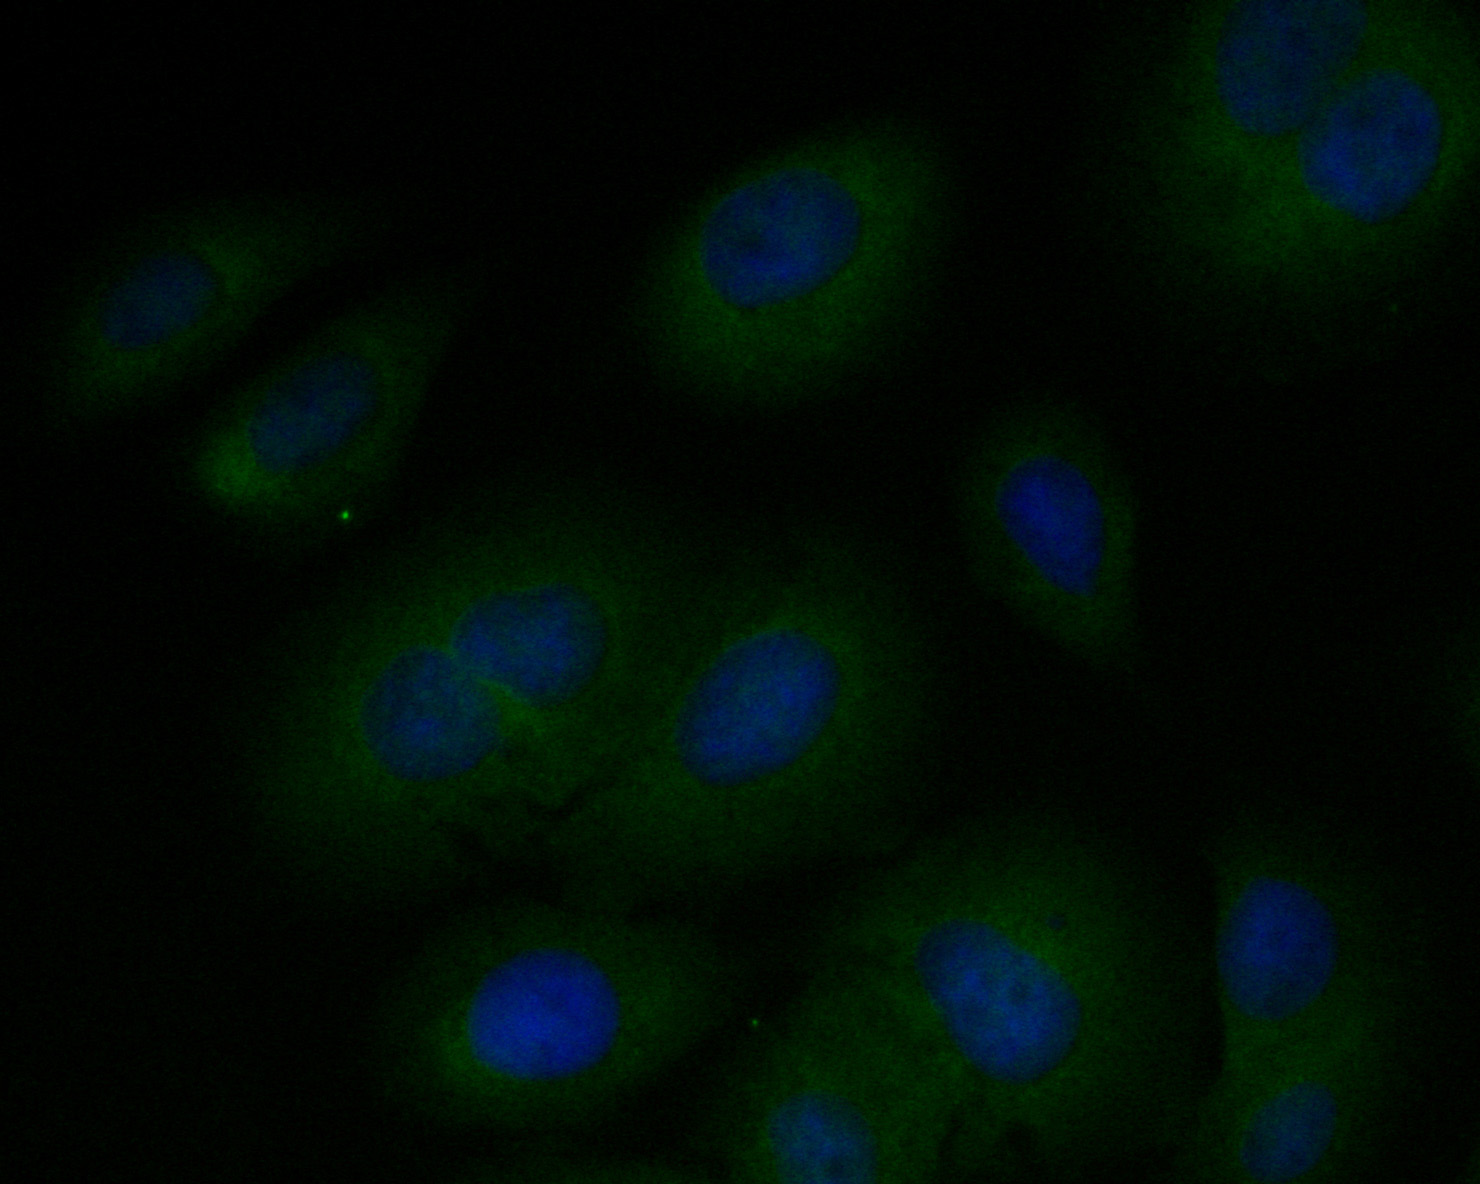 ICC staining of Elongation factor 1-gamma in SKOV-3 cells (green). Formalin fixed cells were permeabilized with 0.1% Triton X-100 in TBS for 10 minutes at room temperature and blocked with 1% Blocker BSA for 15 minutes at room temperature. Cells were probed with the primary antibody (ET7110-45, 1/50) for 1 hour at room temperature, washed with PBS. Alexa Fluor®488 Goat anti-Rabbit IgG was used as the secondary antibody at 1/1,000 dilution. The nuclear counter stain is DAPI (blue).